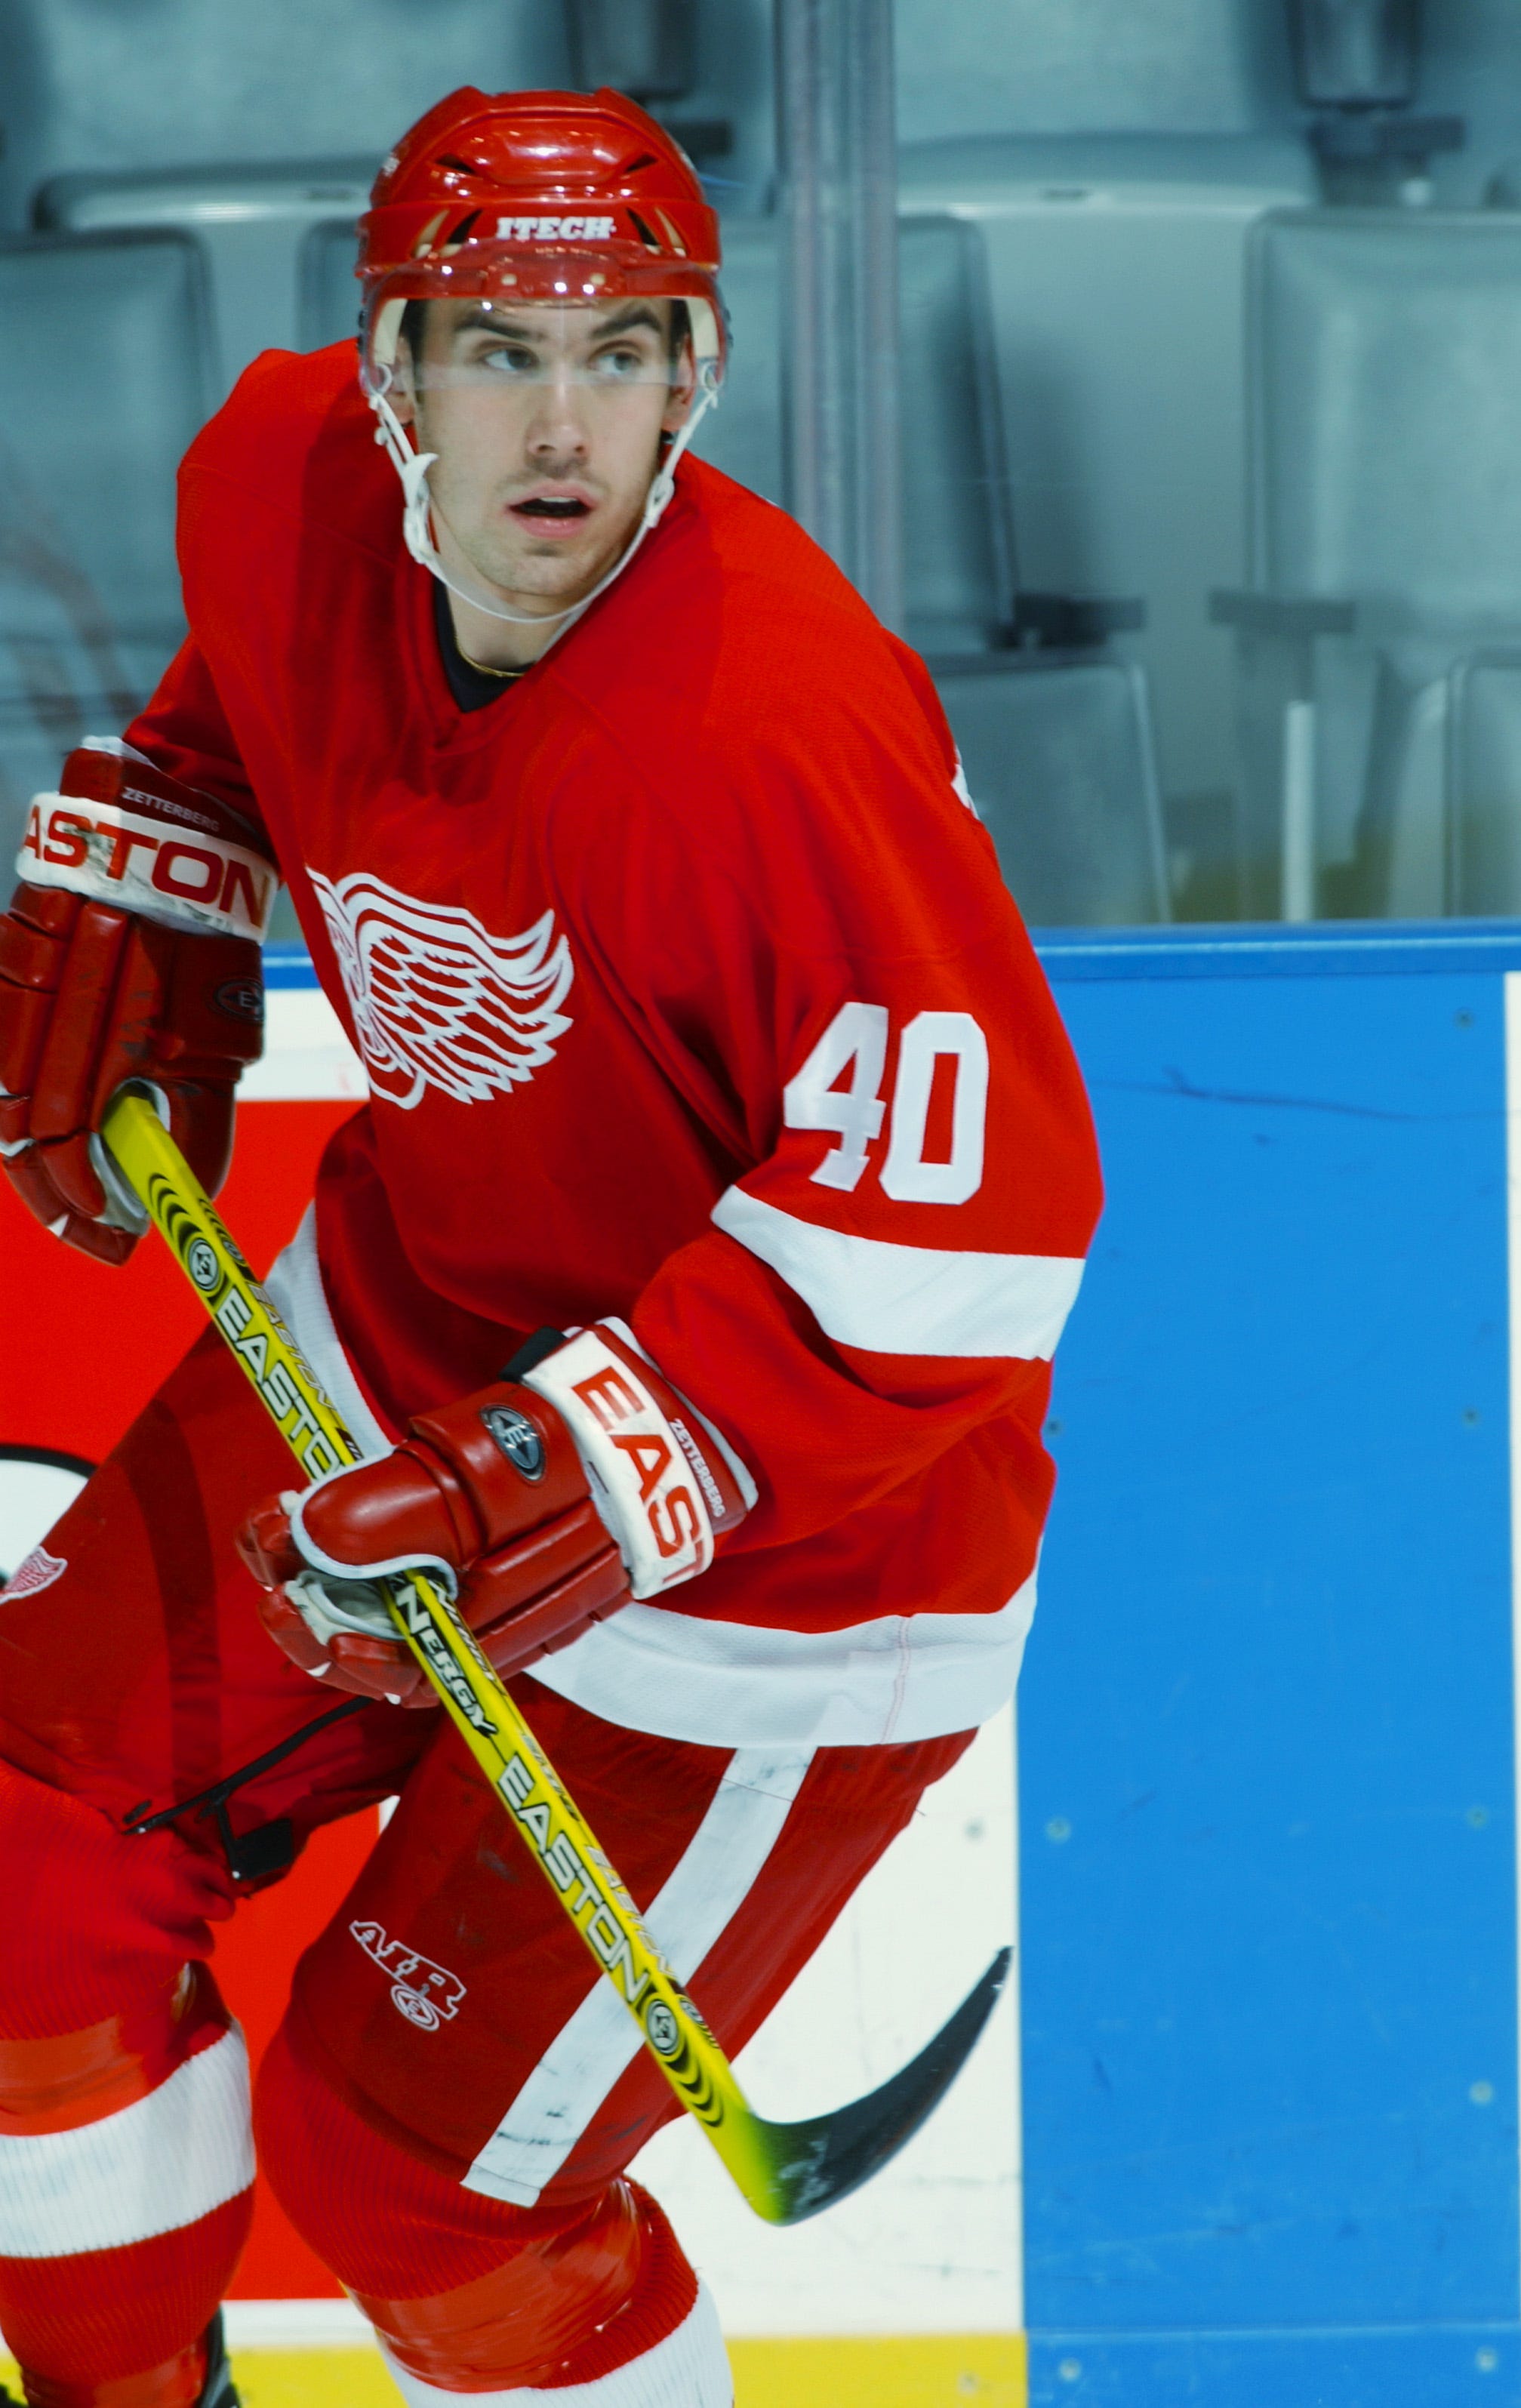 Henrik Zetterberg had 22 goals and 22 assists in 79 goals during his first season with the Red Wings in 2002-03.